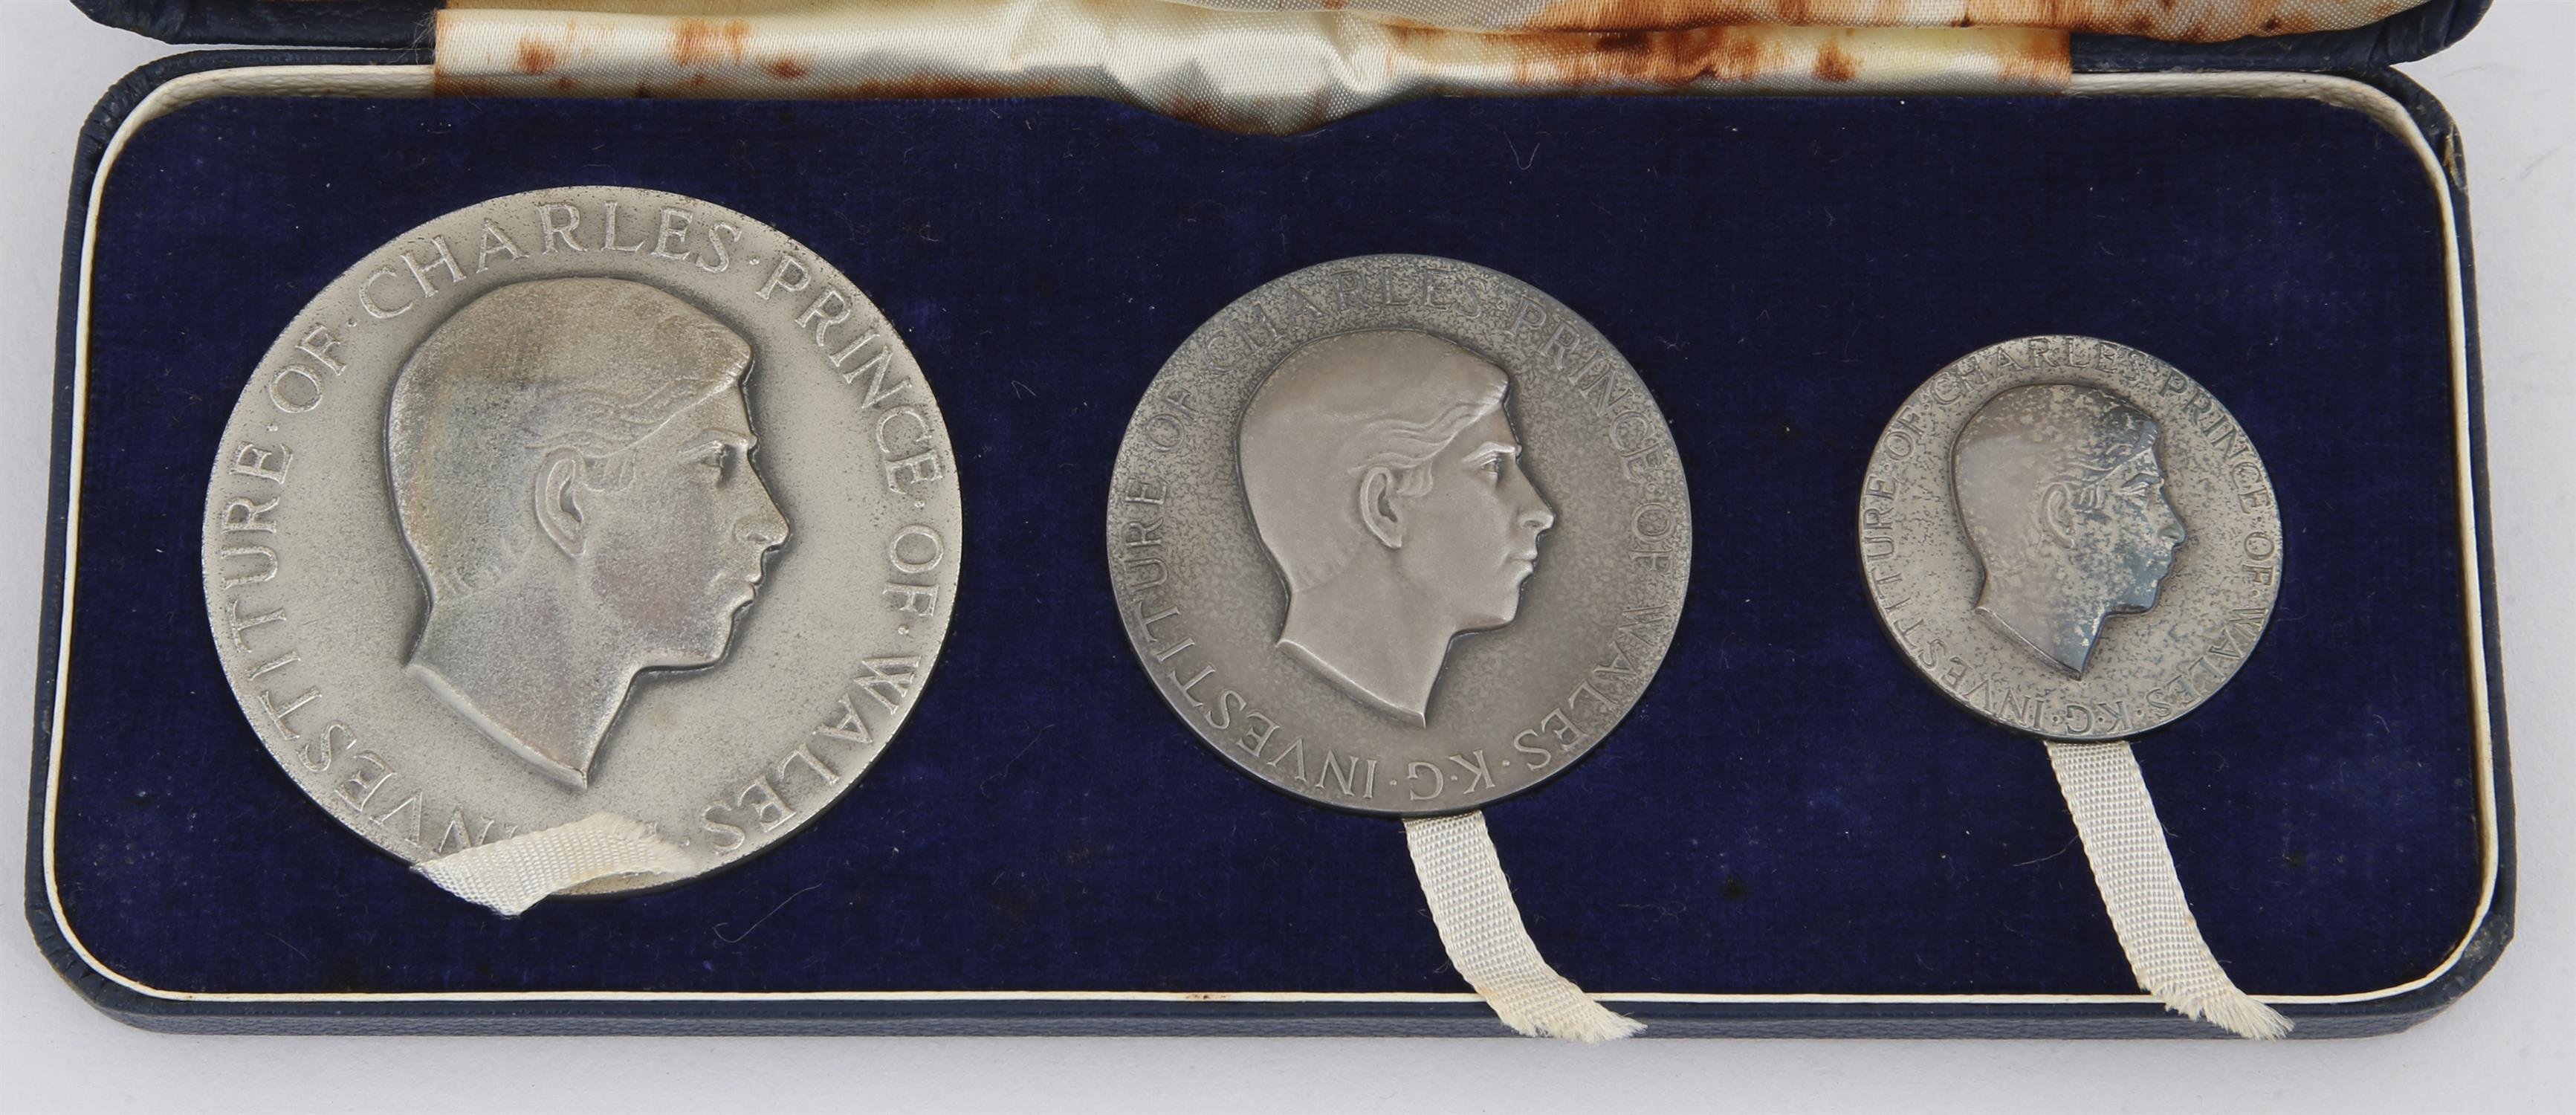 1969 Britannia silver Prince of Wales Investiture three-piece coin set by John Pinches of London, - Image 2 of 6